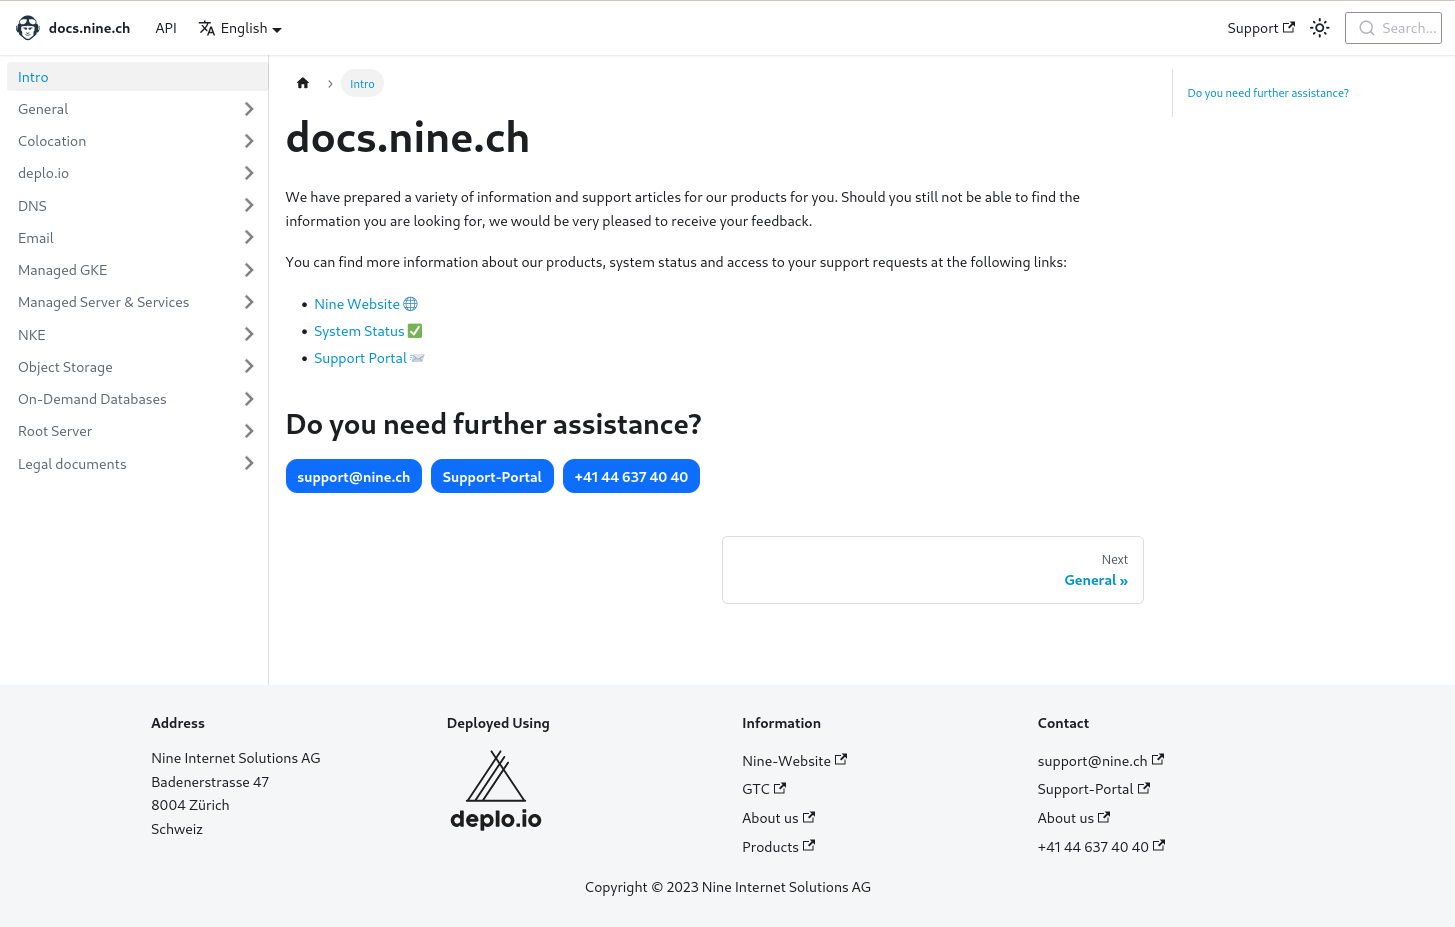 Relaunch of docs.nine.ch with Docusaurus on Deploio!